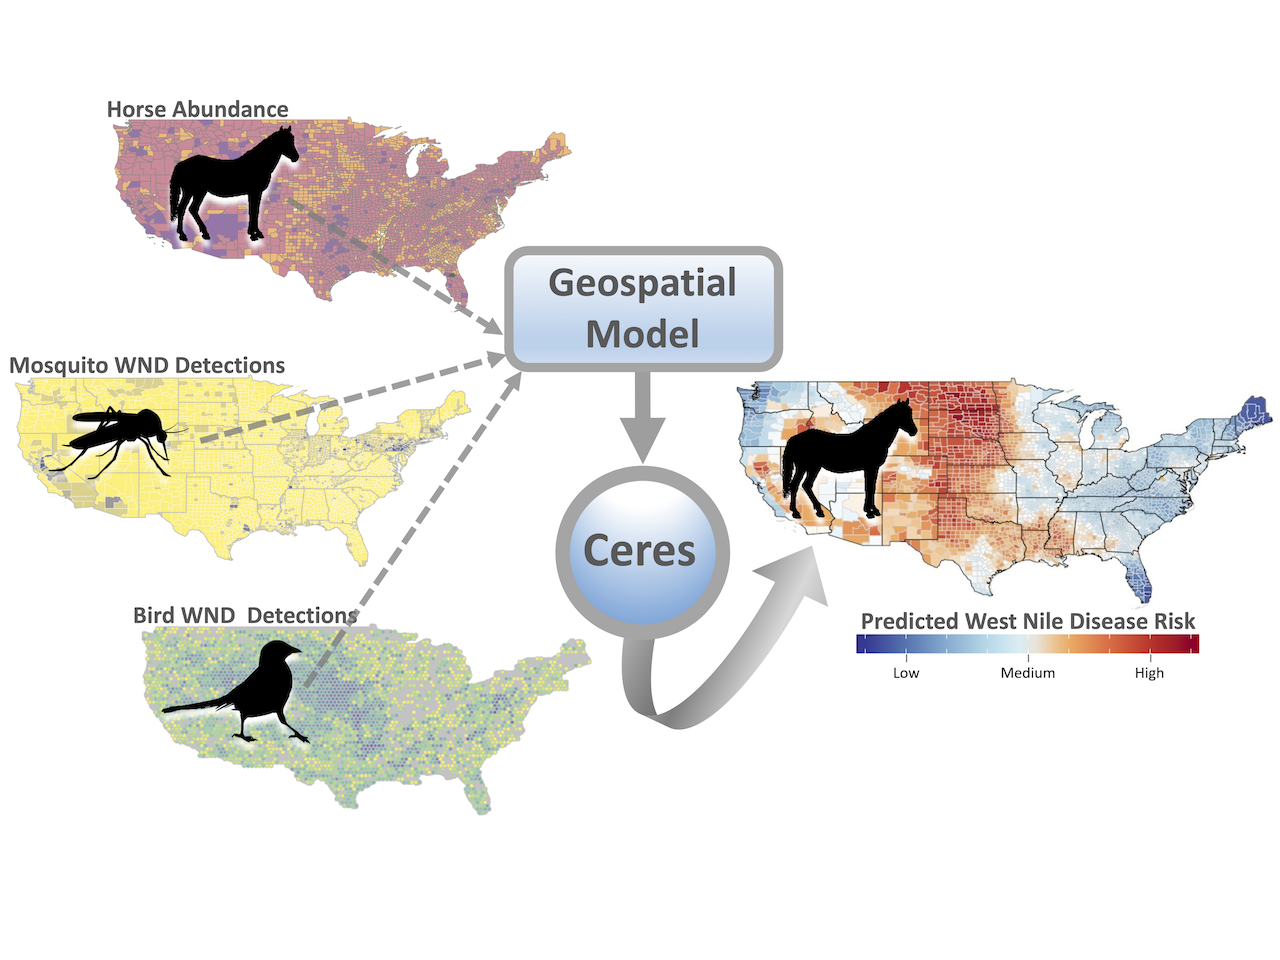 Visualization of spatial data being used in a model to predict West Nile Disease Risk using Ceres